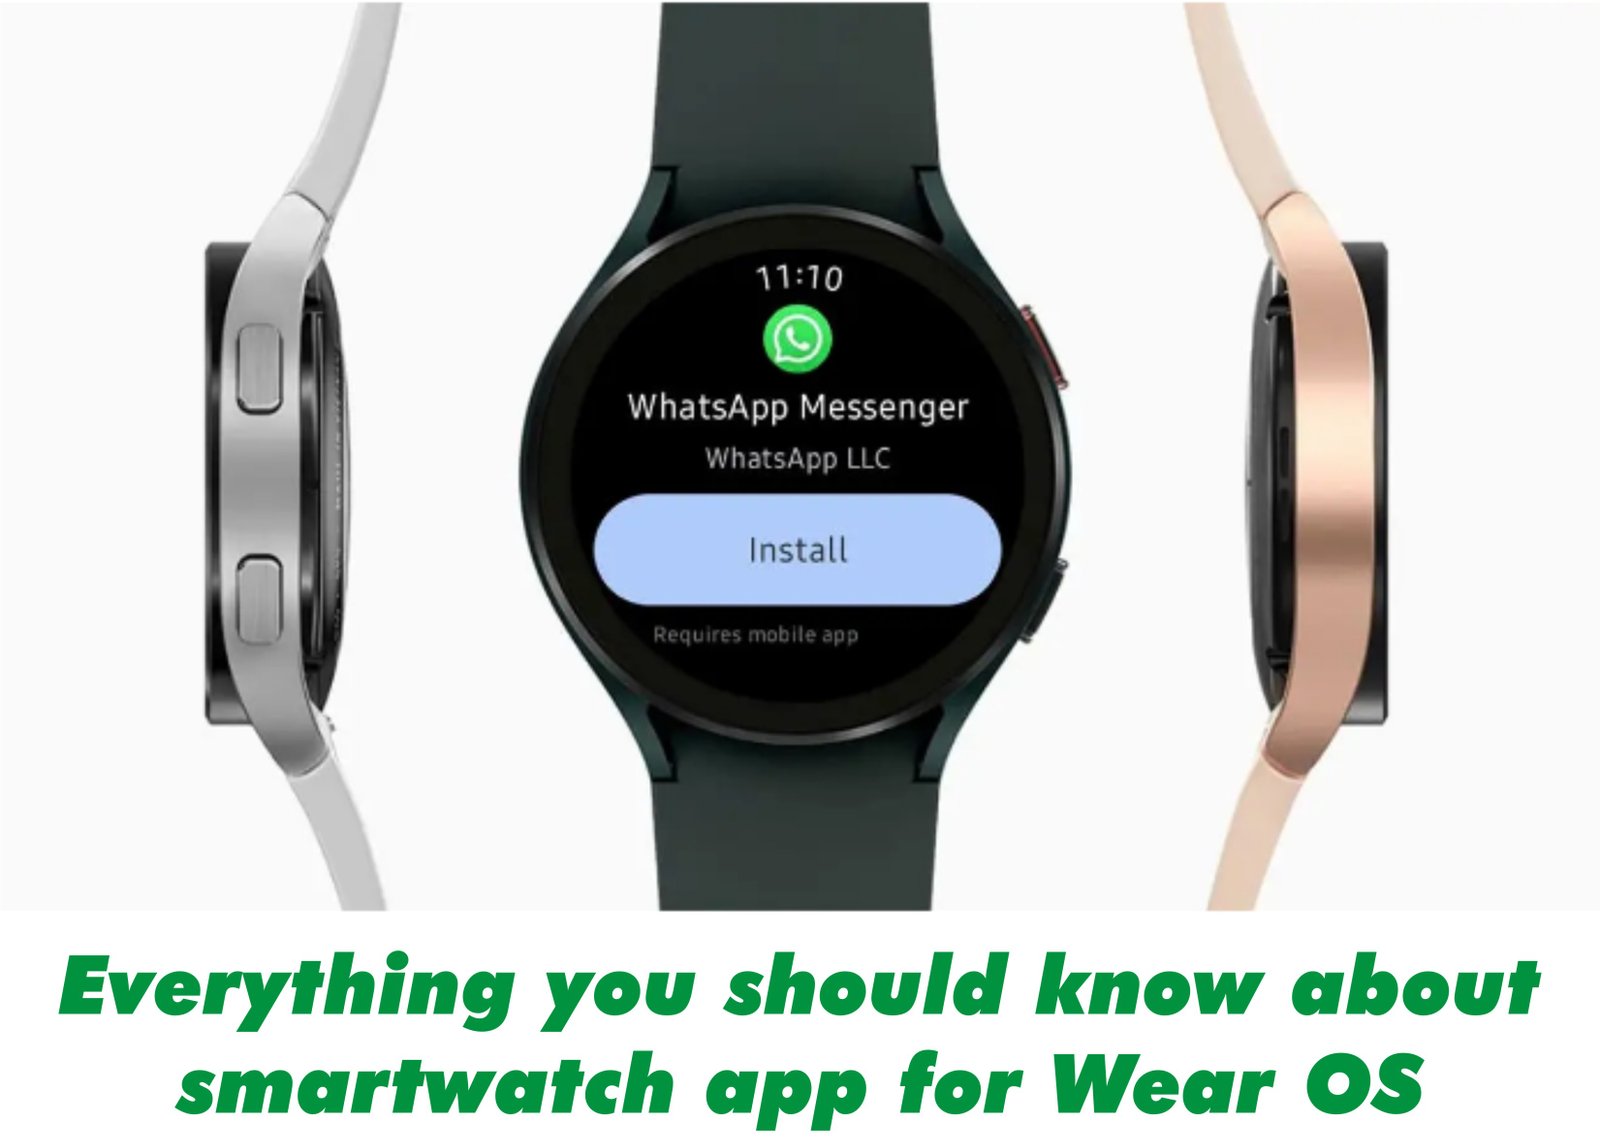 Everything you should know about smartwatch app for Wear OS